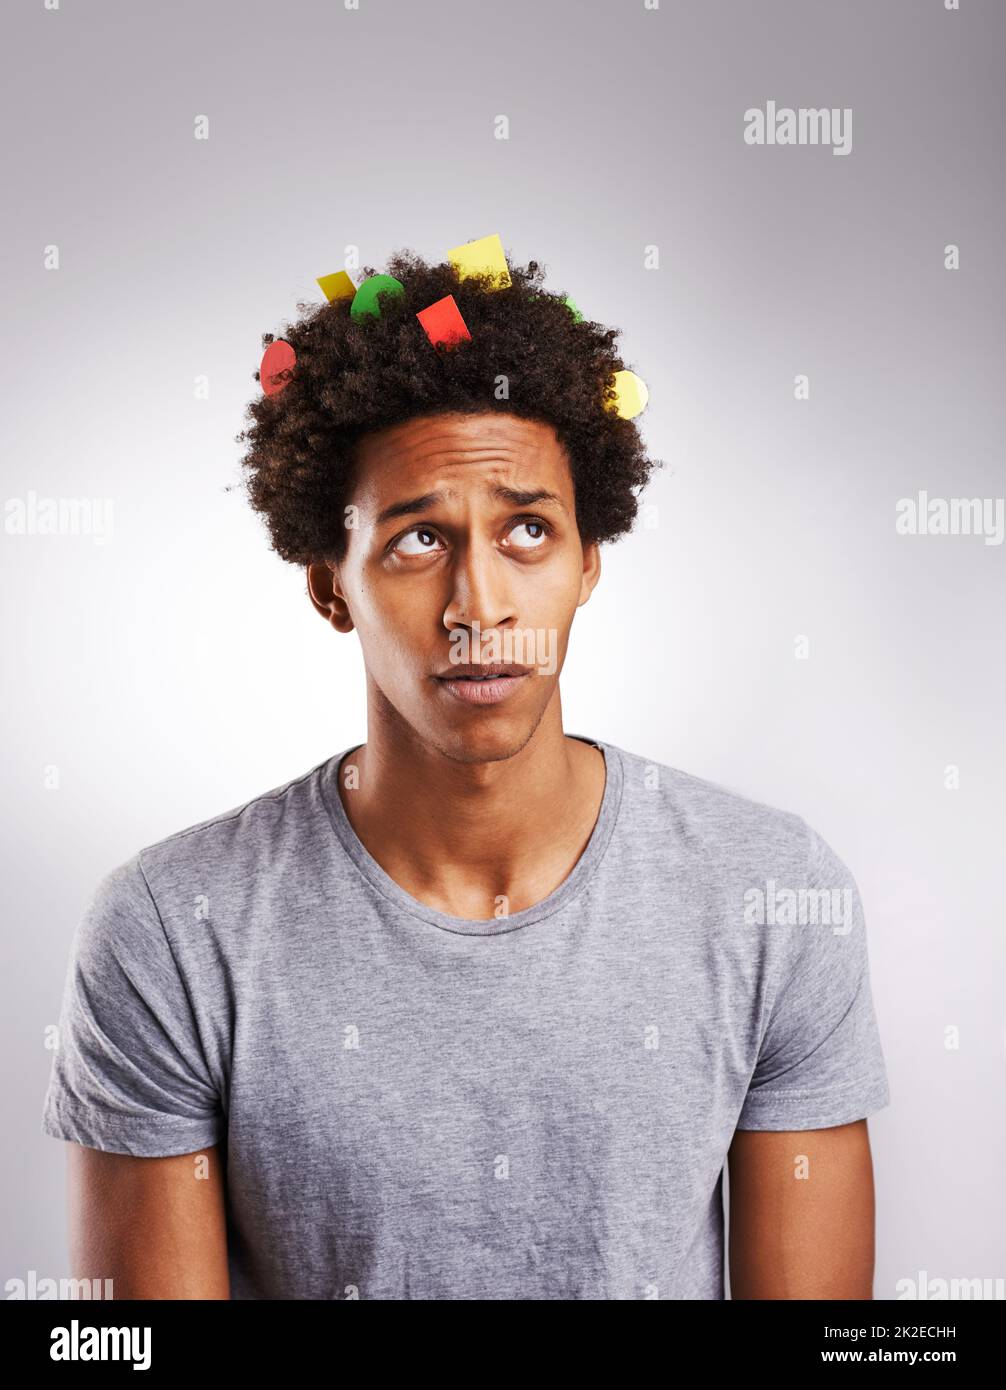 Its time to think in color. Shot of a young man with colorful paper in his hair against a gray background. Stock Photo